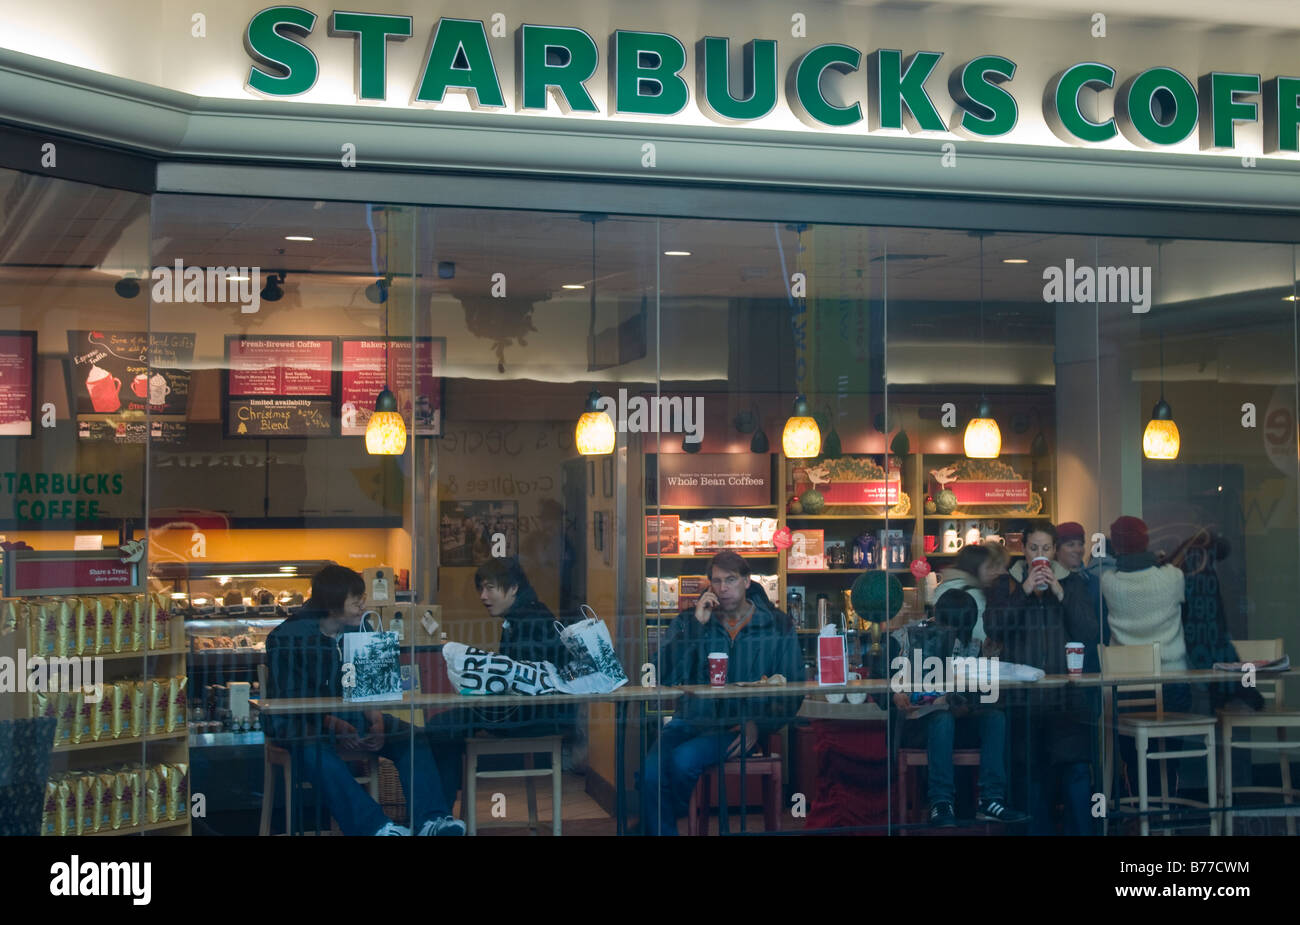 Starbucks Coffee shop inside a shopping mall photographed through the